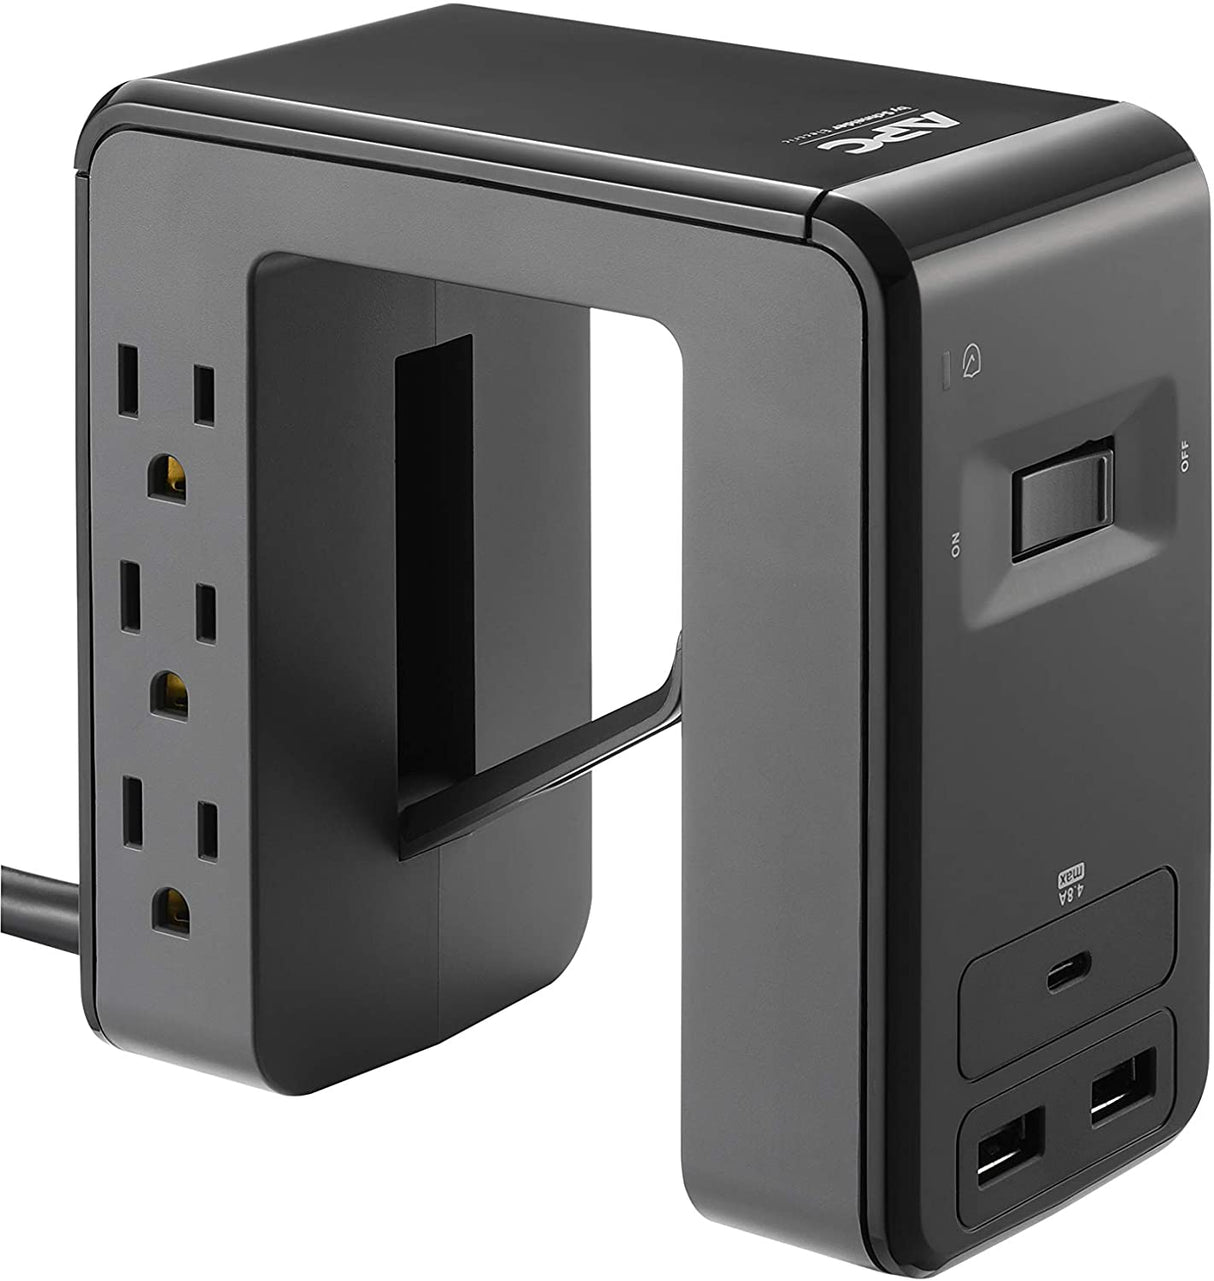 APC Desk Mount Power Station PE6U21, U-Shaped Surge Protector with USB Ports (3), Desk Clamp, 6 Outlet, 1080 Joules Black Black 3 USB Charging Ports (Type C &amp; Type A) Outlet